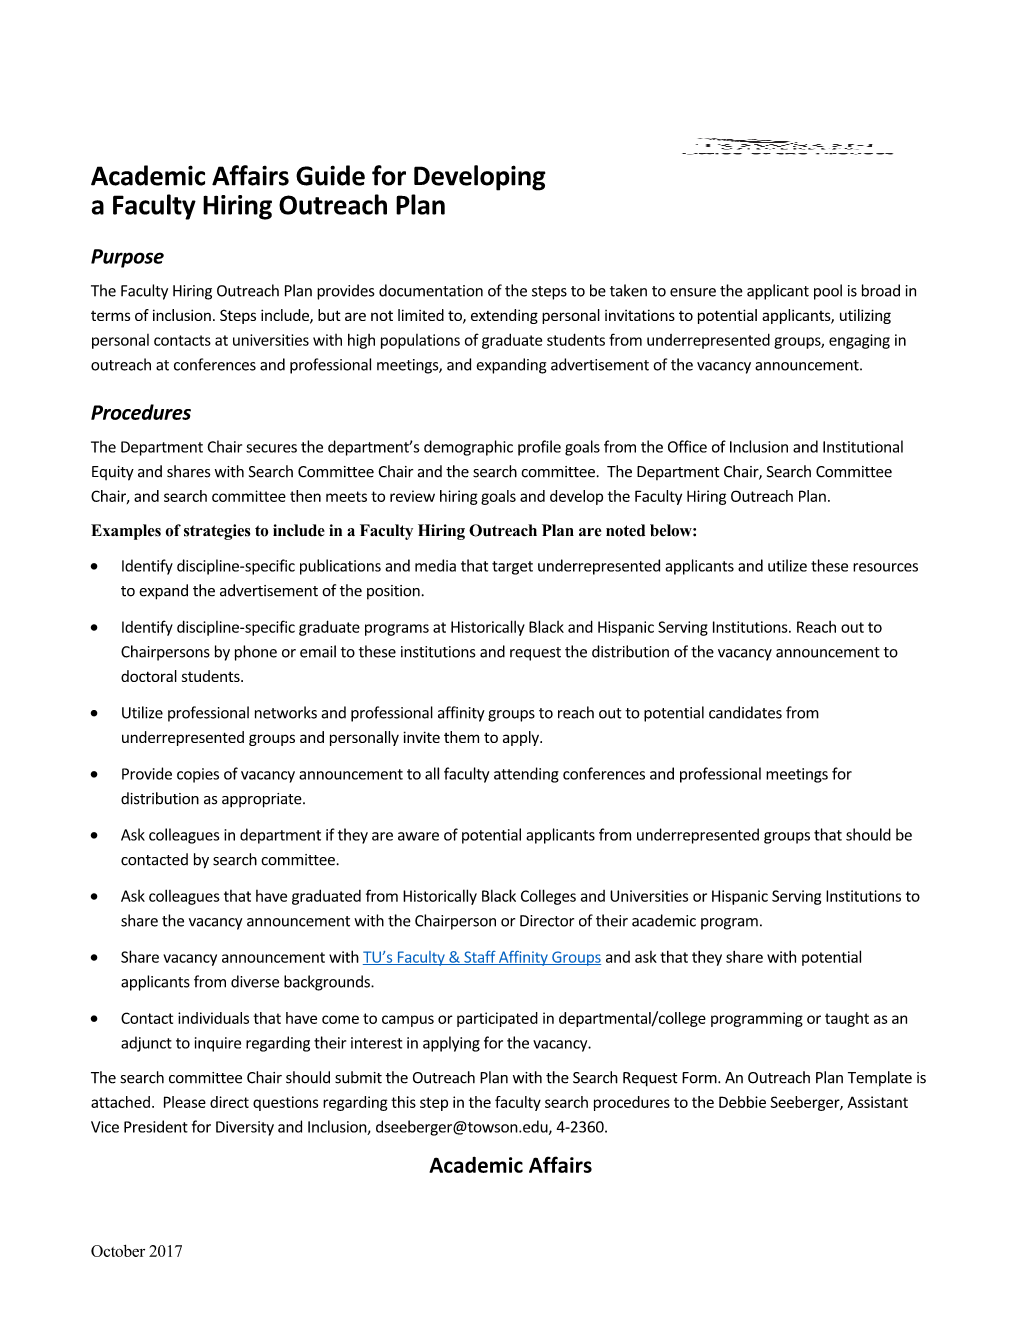 Academic Affairs Guide for Developing a Faculty Hiring Outreach Plan